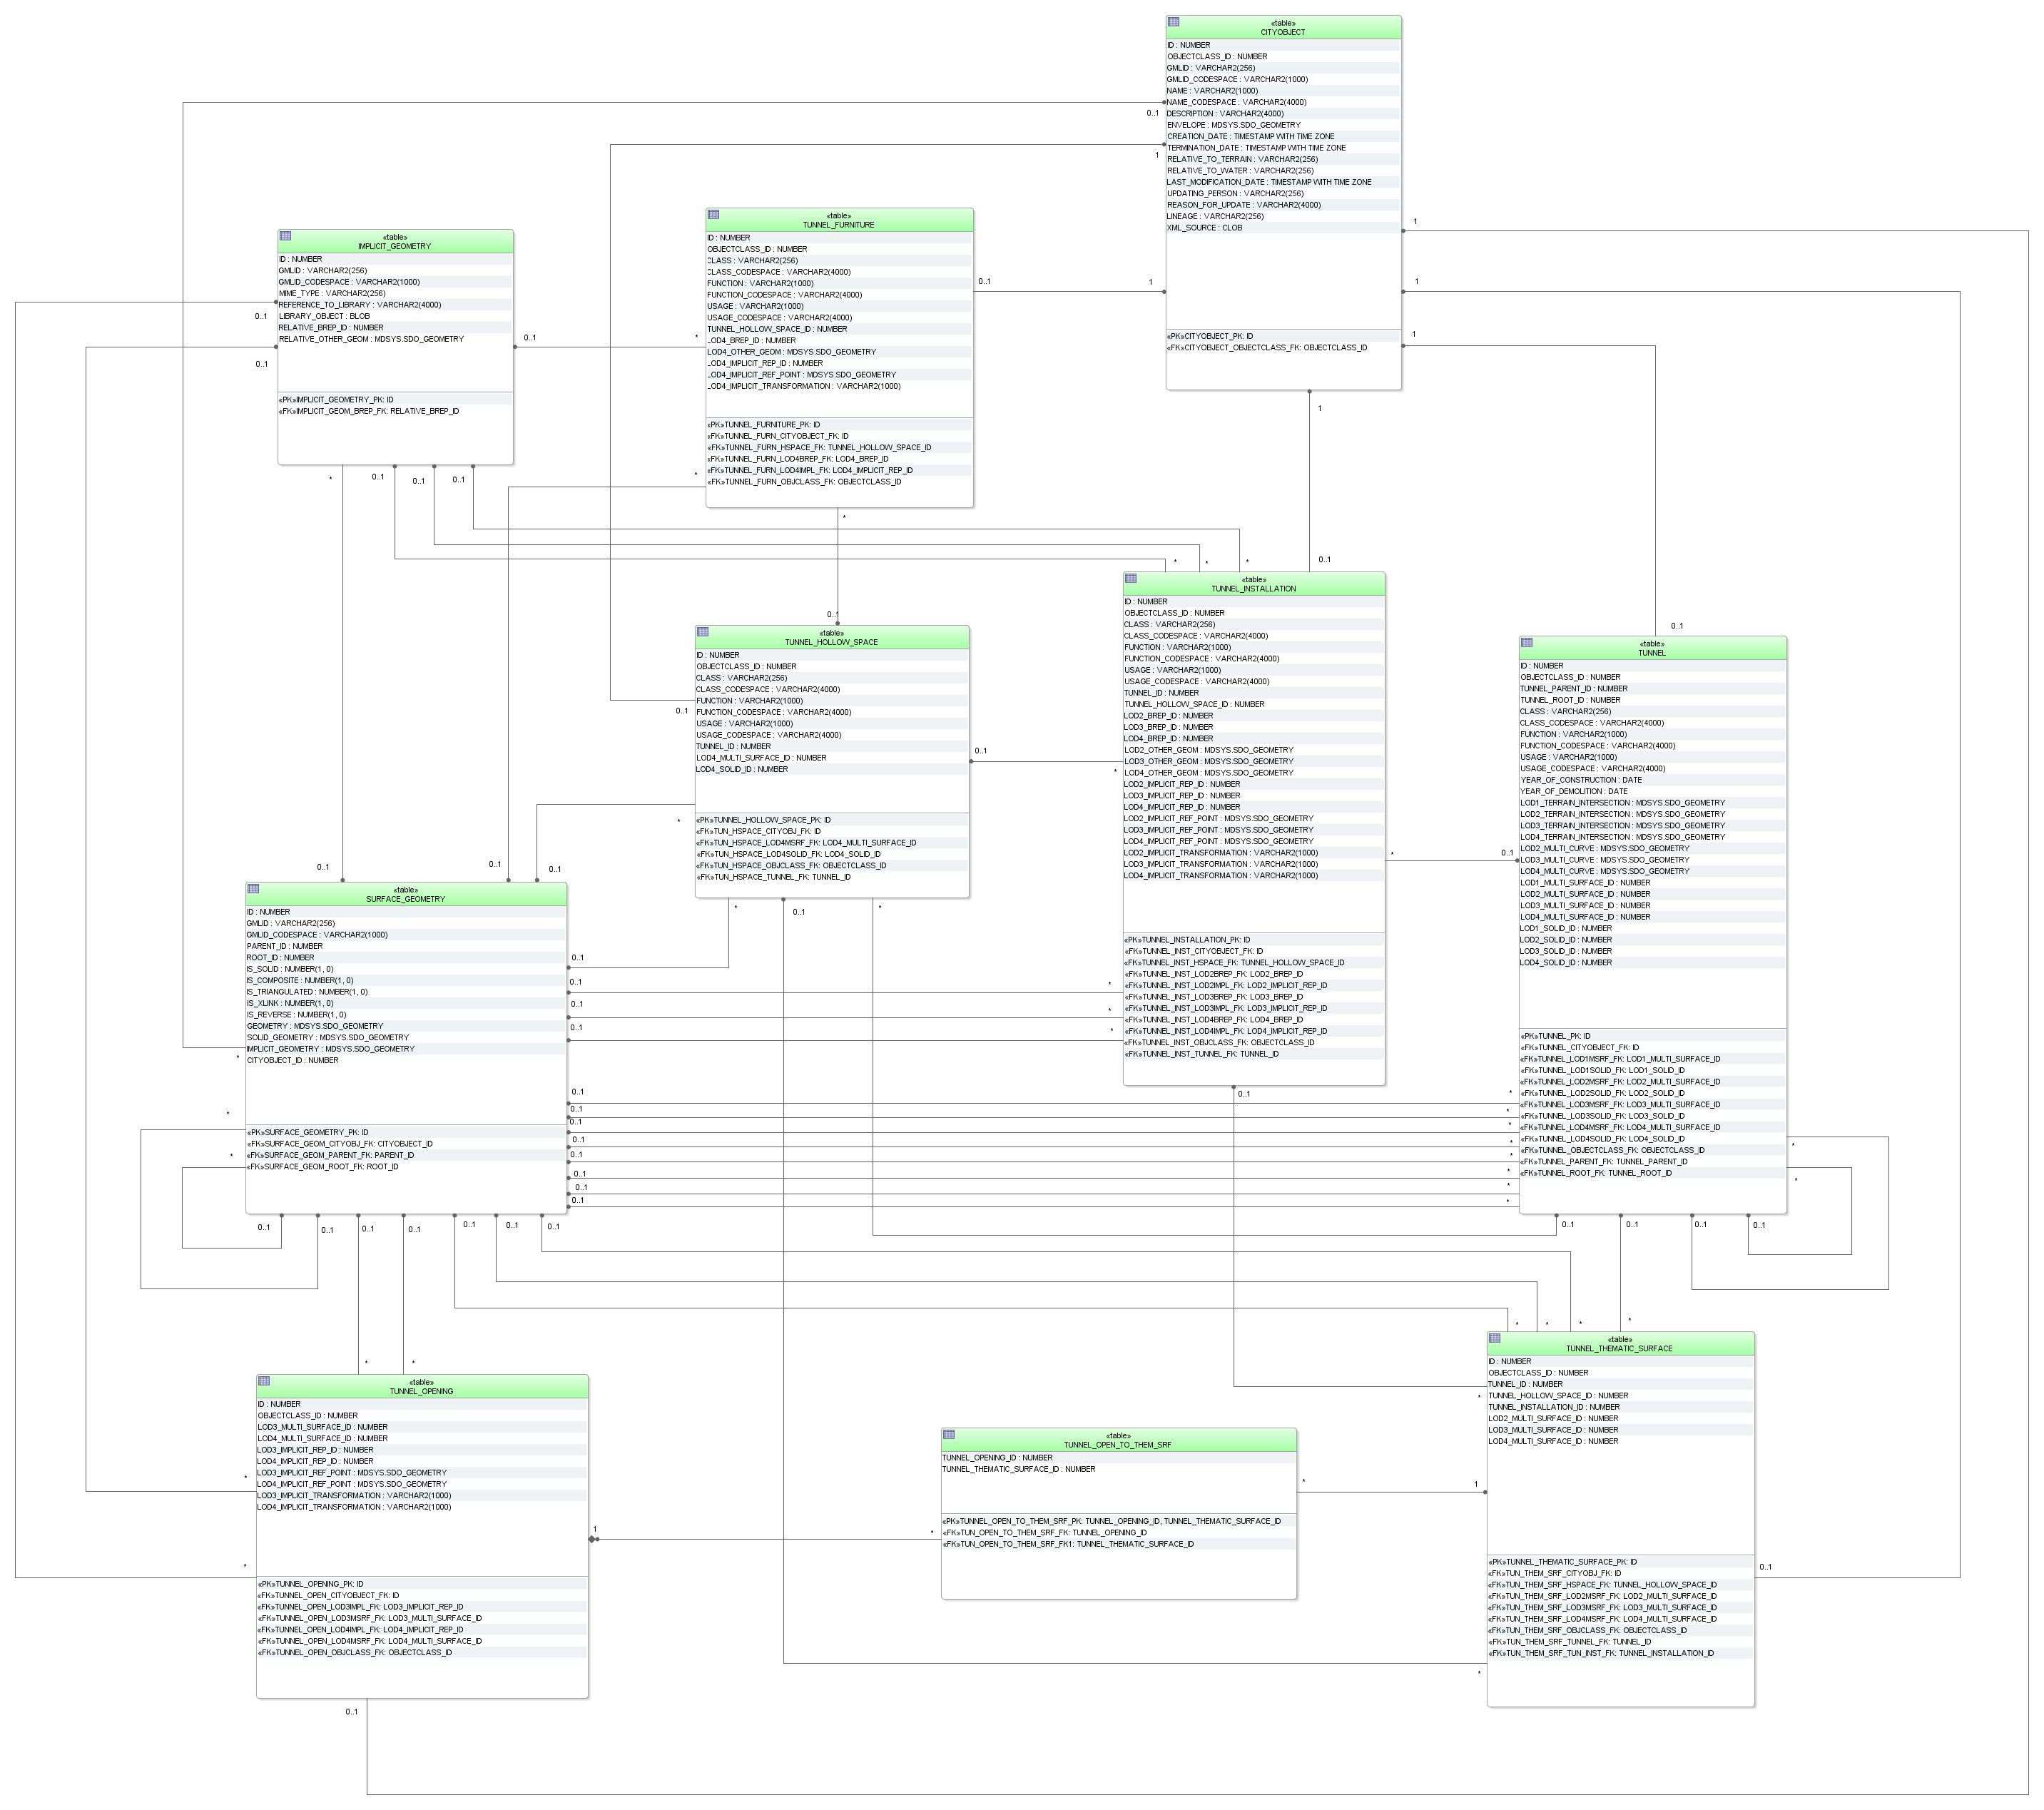 ../../_images/citydb_schema_tunnel_diagram.png